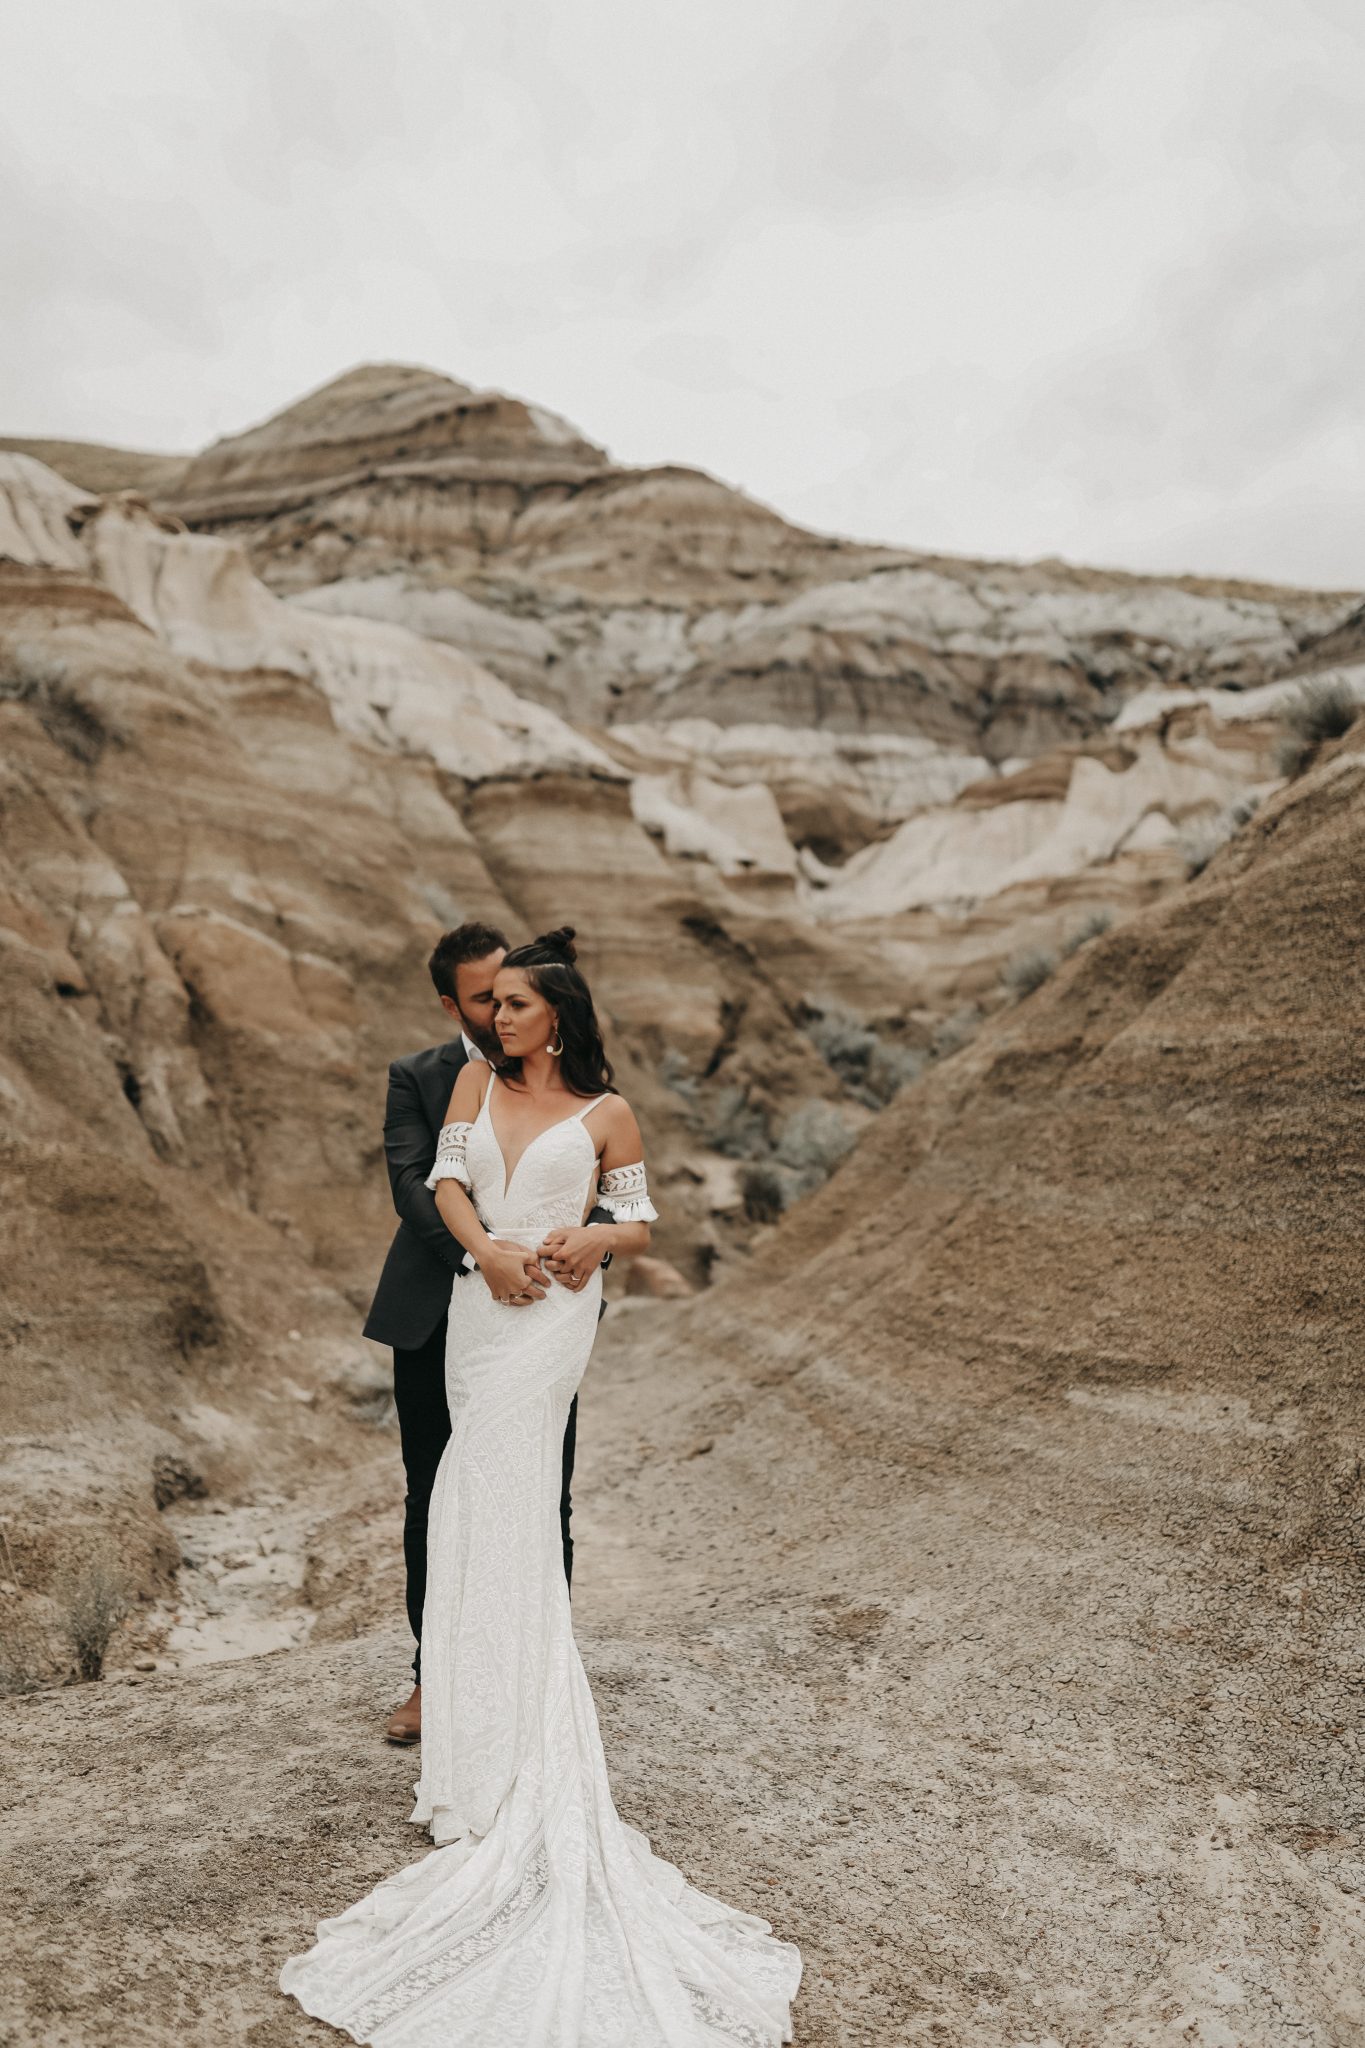 Bride and groom pose amongst the sand hills of Drumheller Alberta for a moroccan inspired elopement